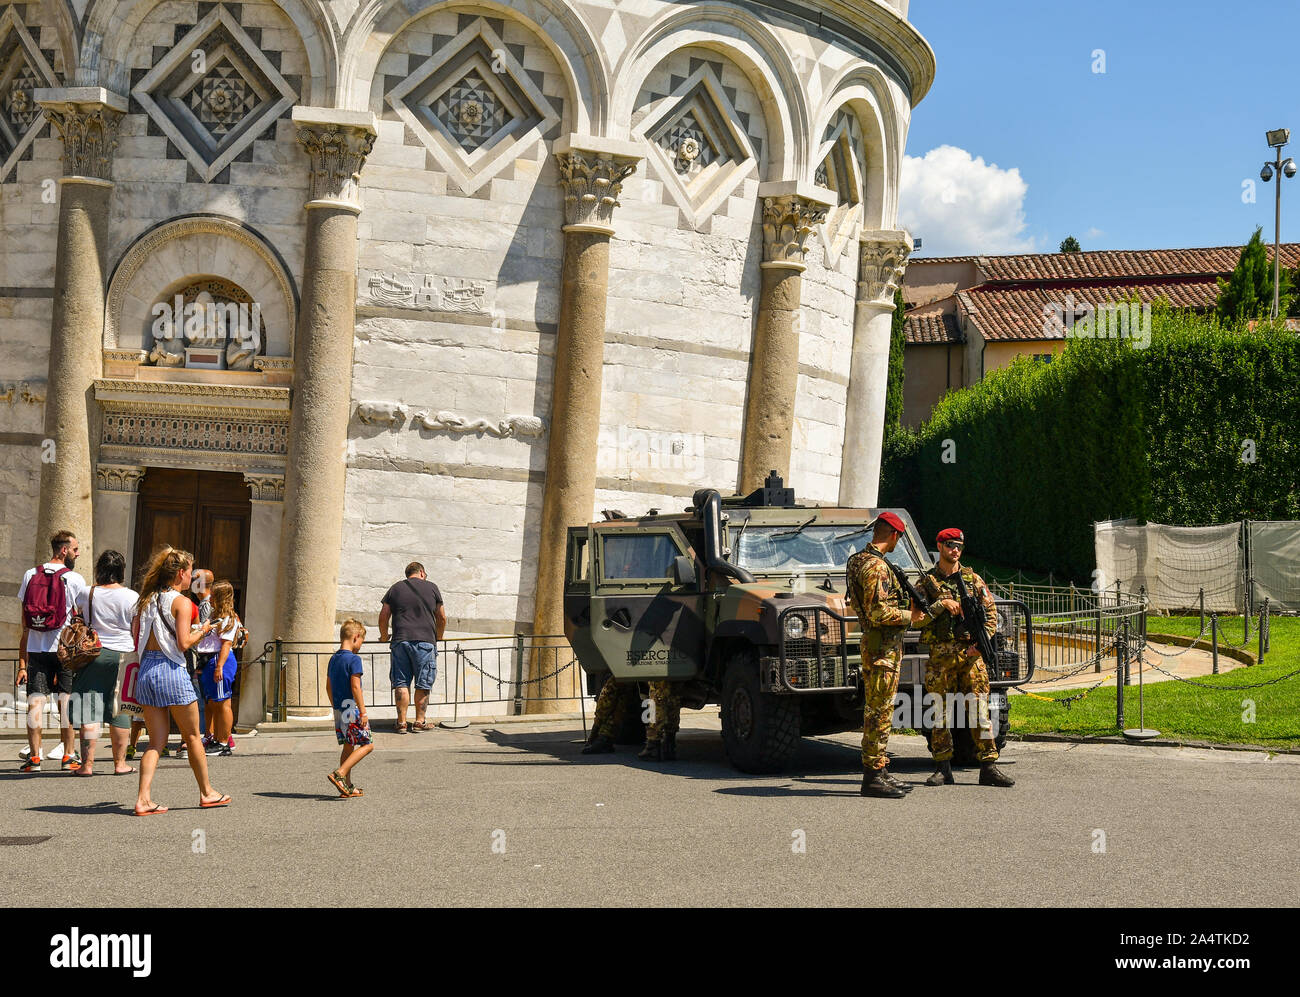 Soldiers of Italian army with a military vehicle Iveco LMV in front of the famous Leaning Tower of Pisa, Unesco World Heritage Site, Tuscany, Italy Stock Photo